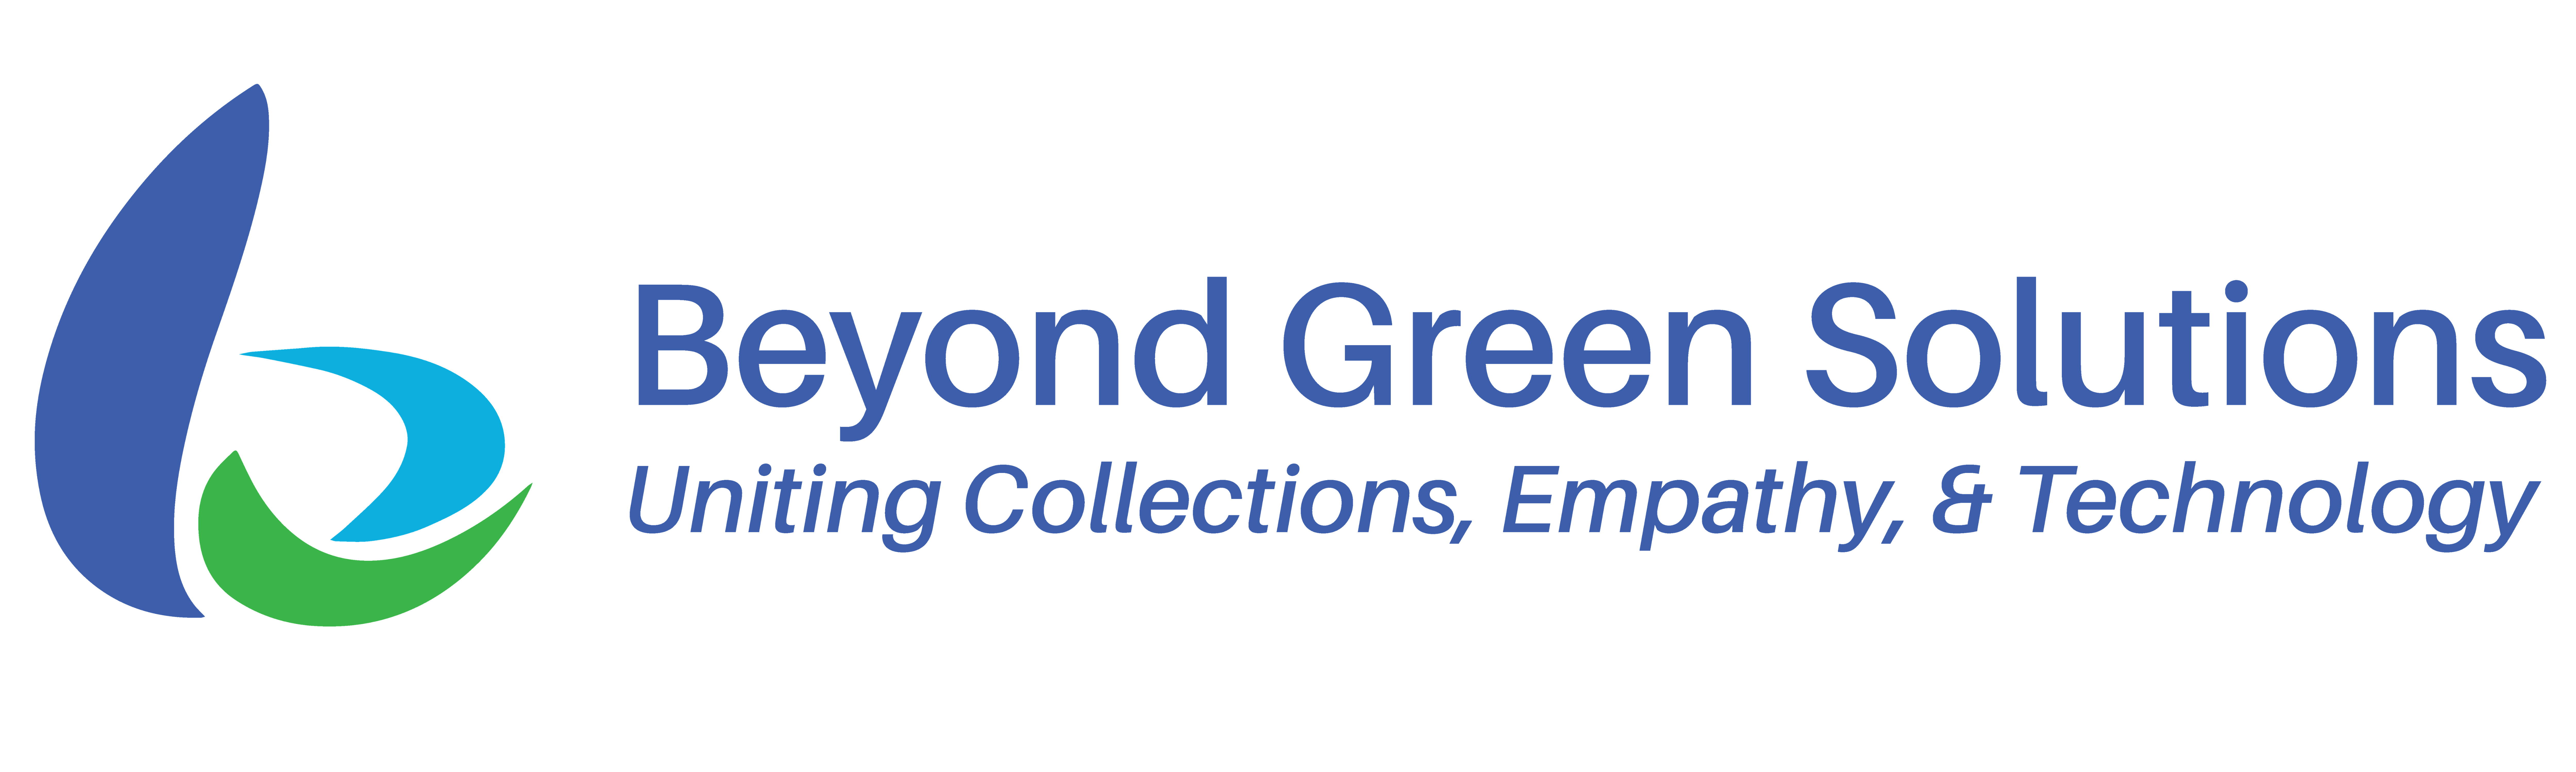 Beyond Green Solutions, Patient Collections, Full-Service Debt Collections, Healthcare Collections